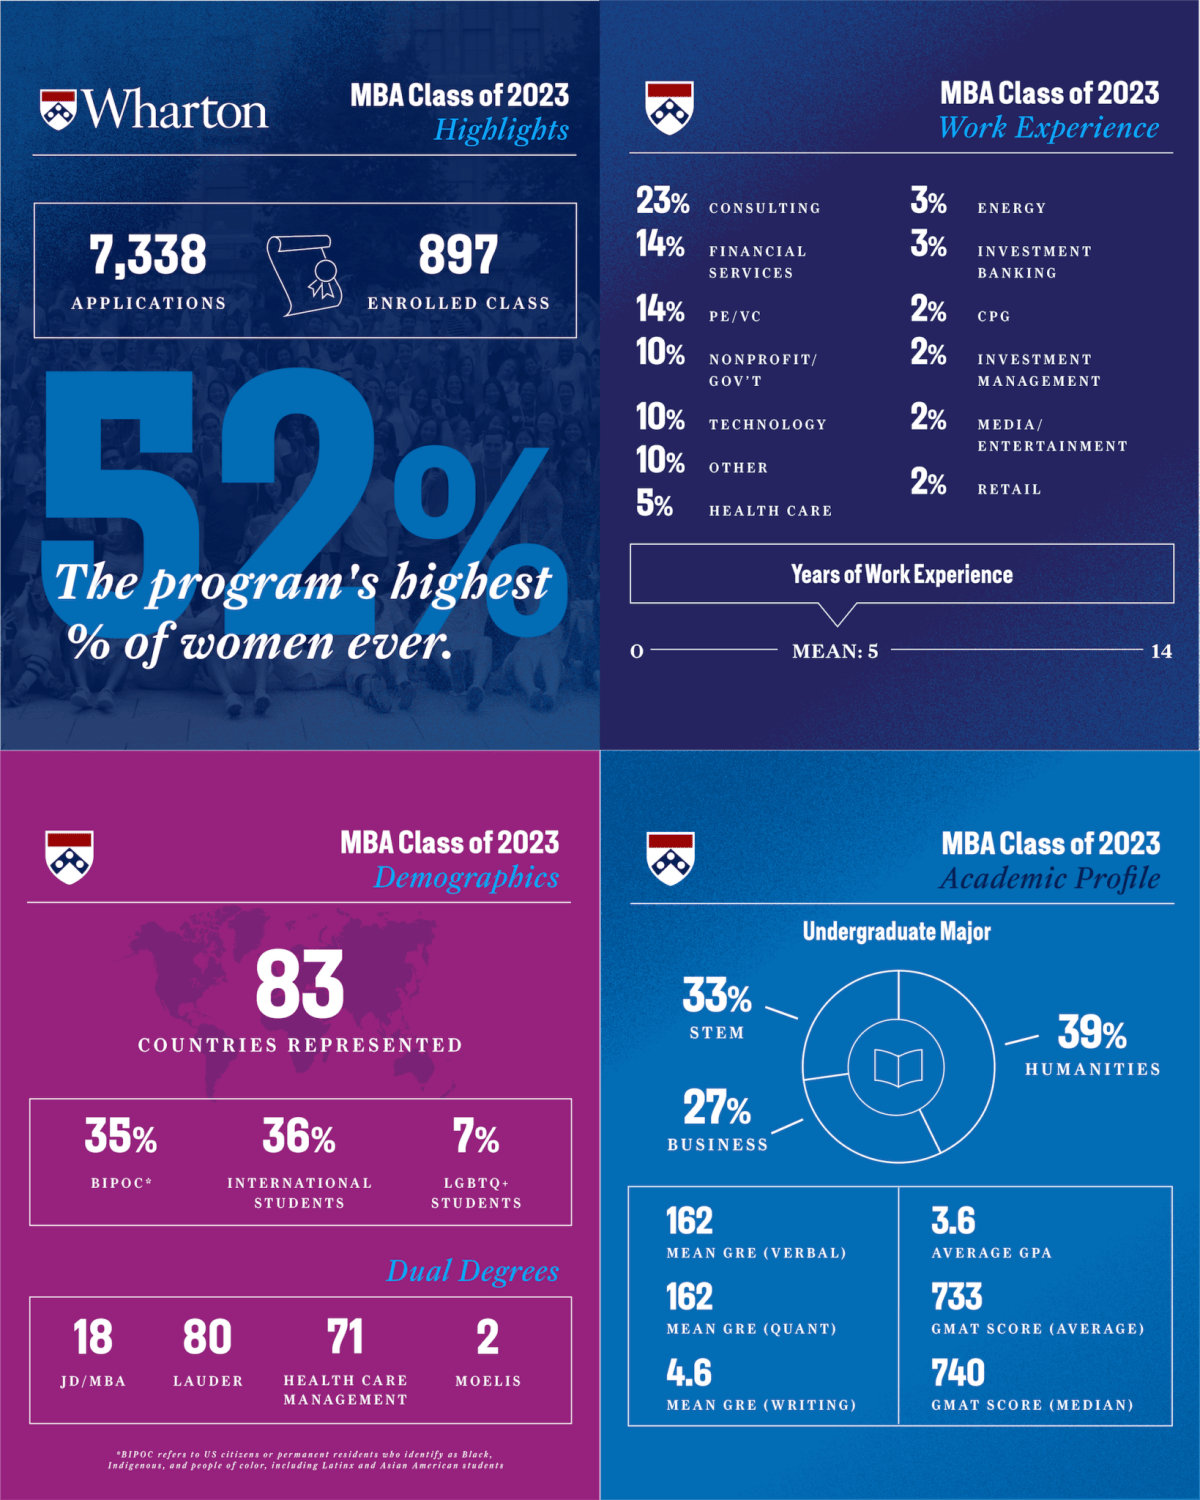 Statistics about the MBA class of 2023.